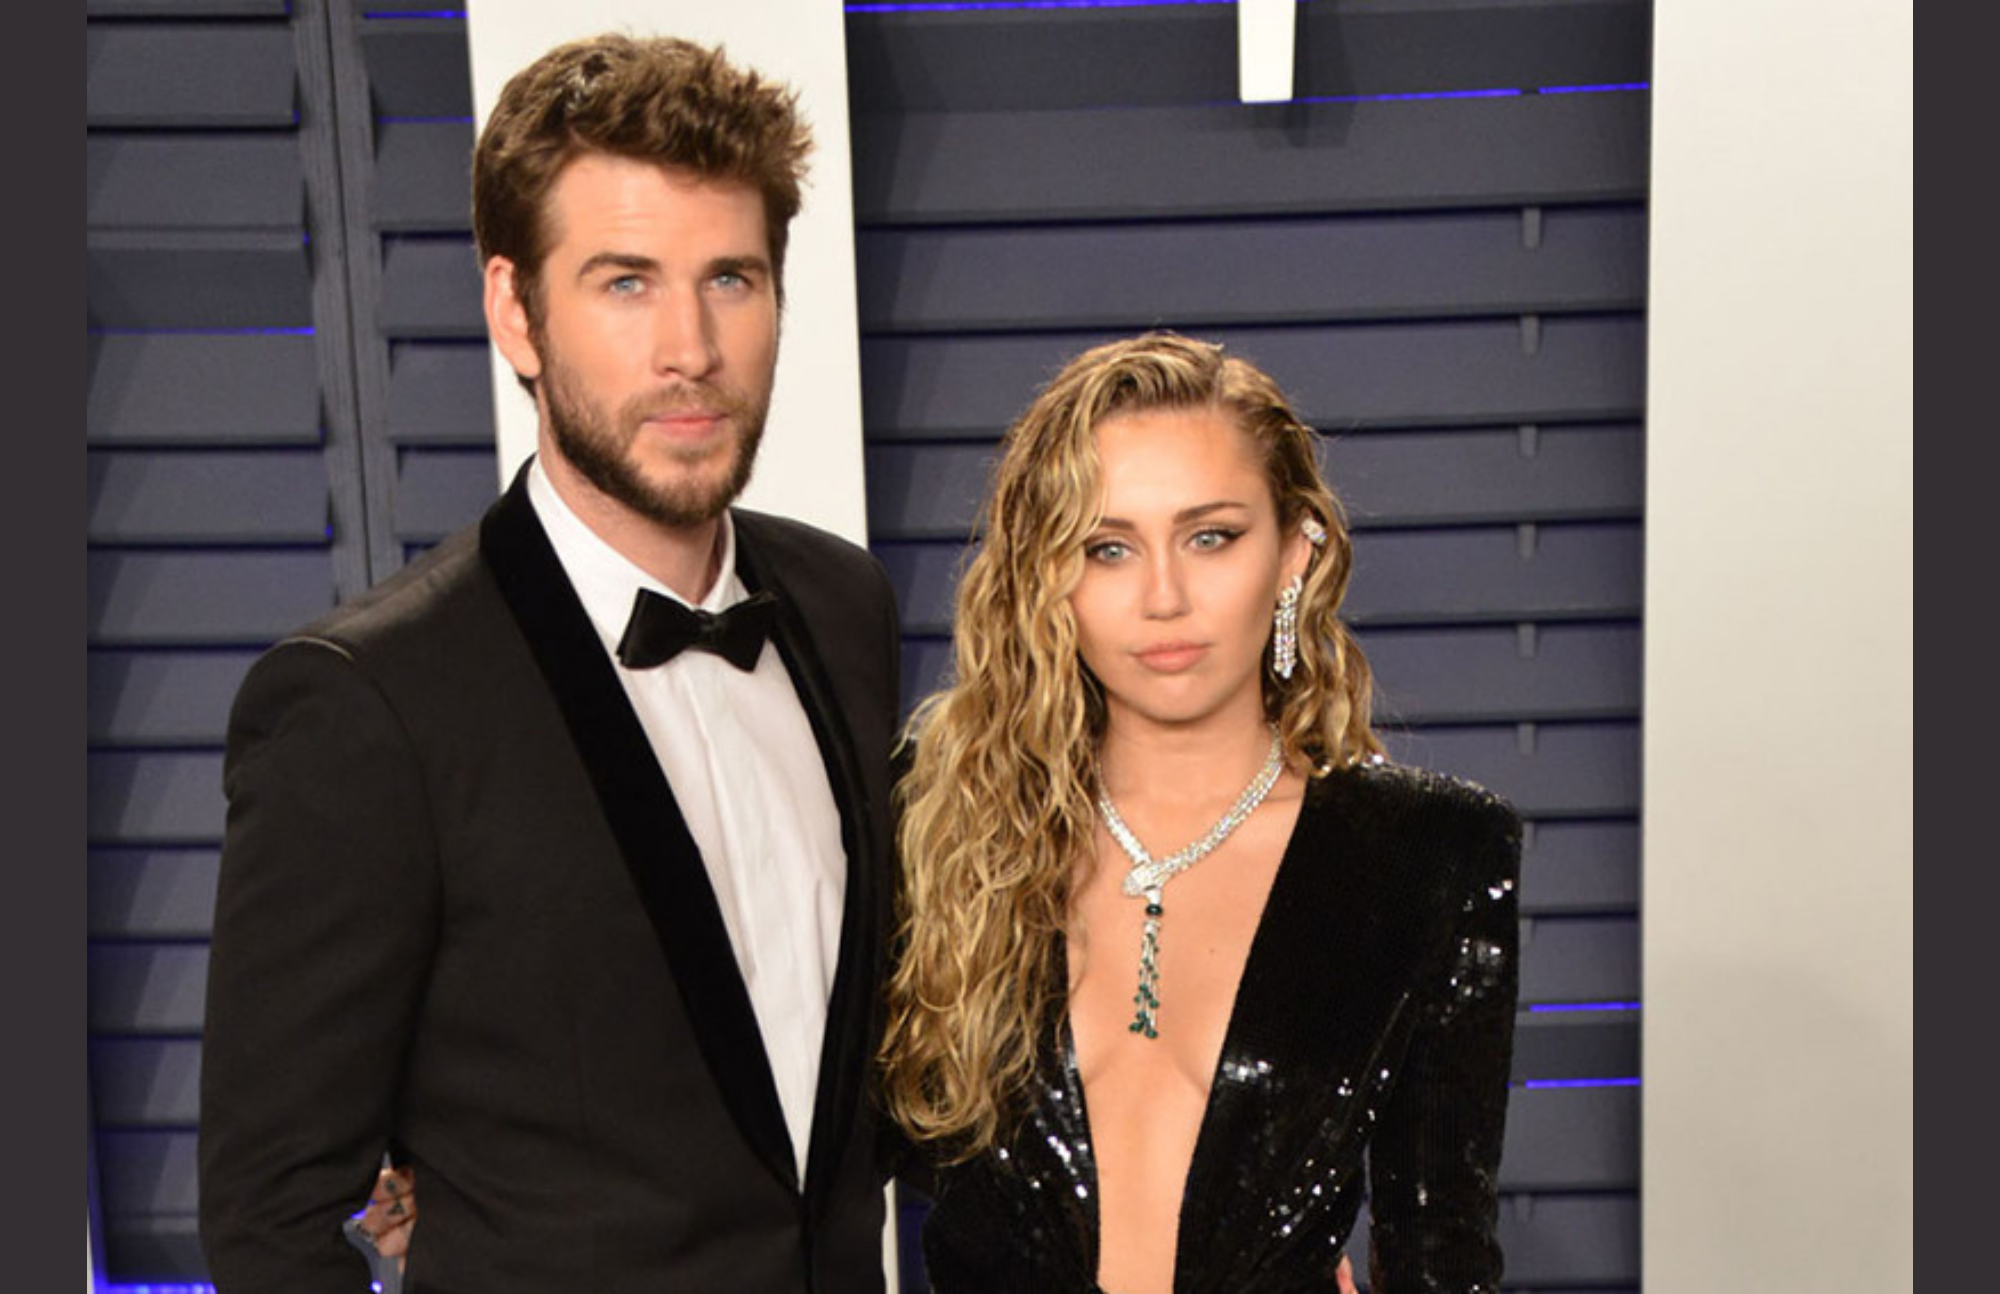 Miley Cyrus and her husband Liam Hemsworth attended an event while dressed in all black